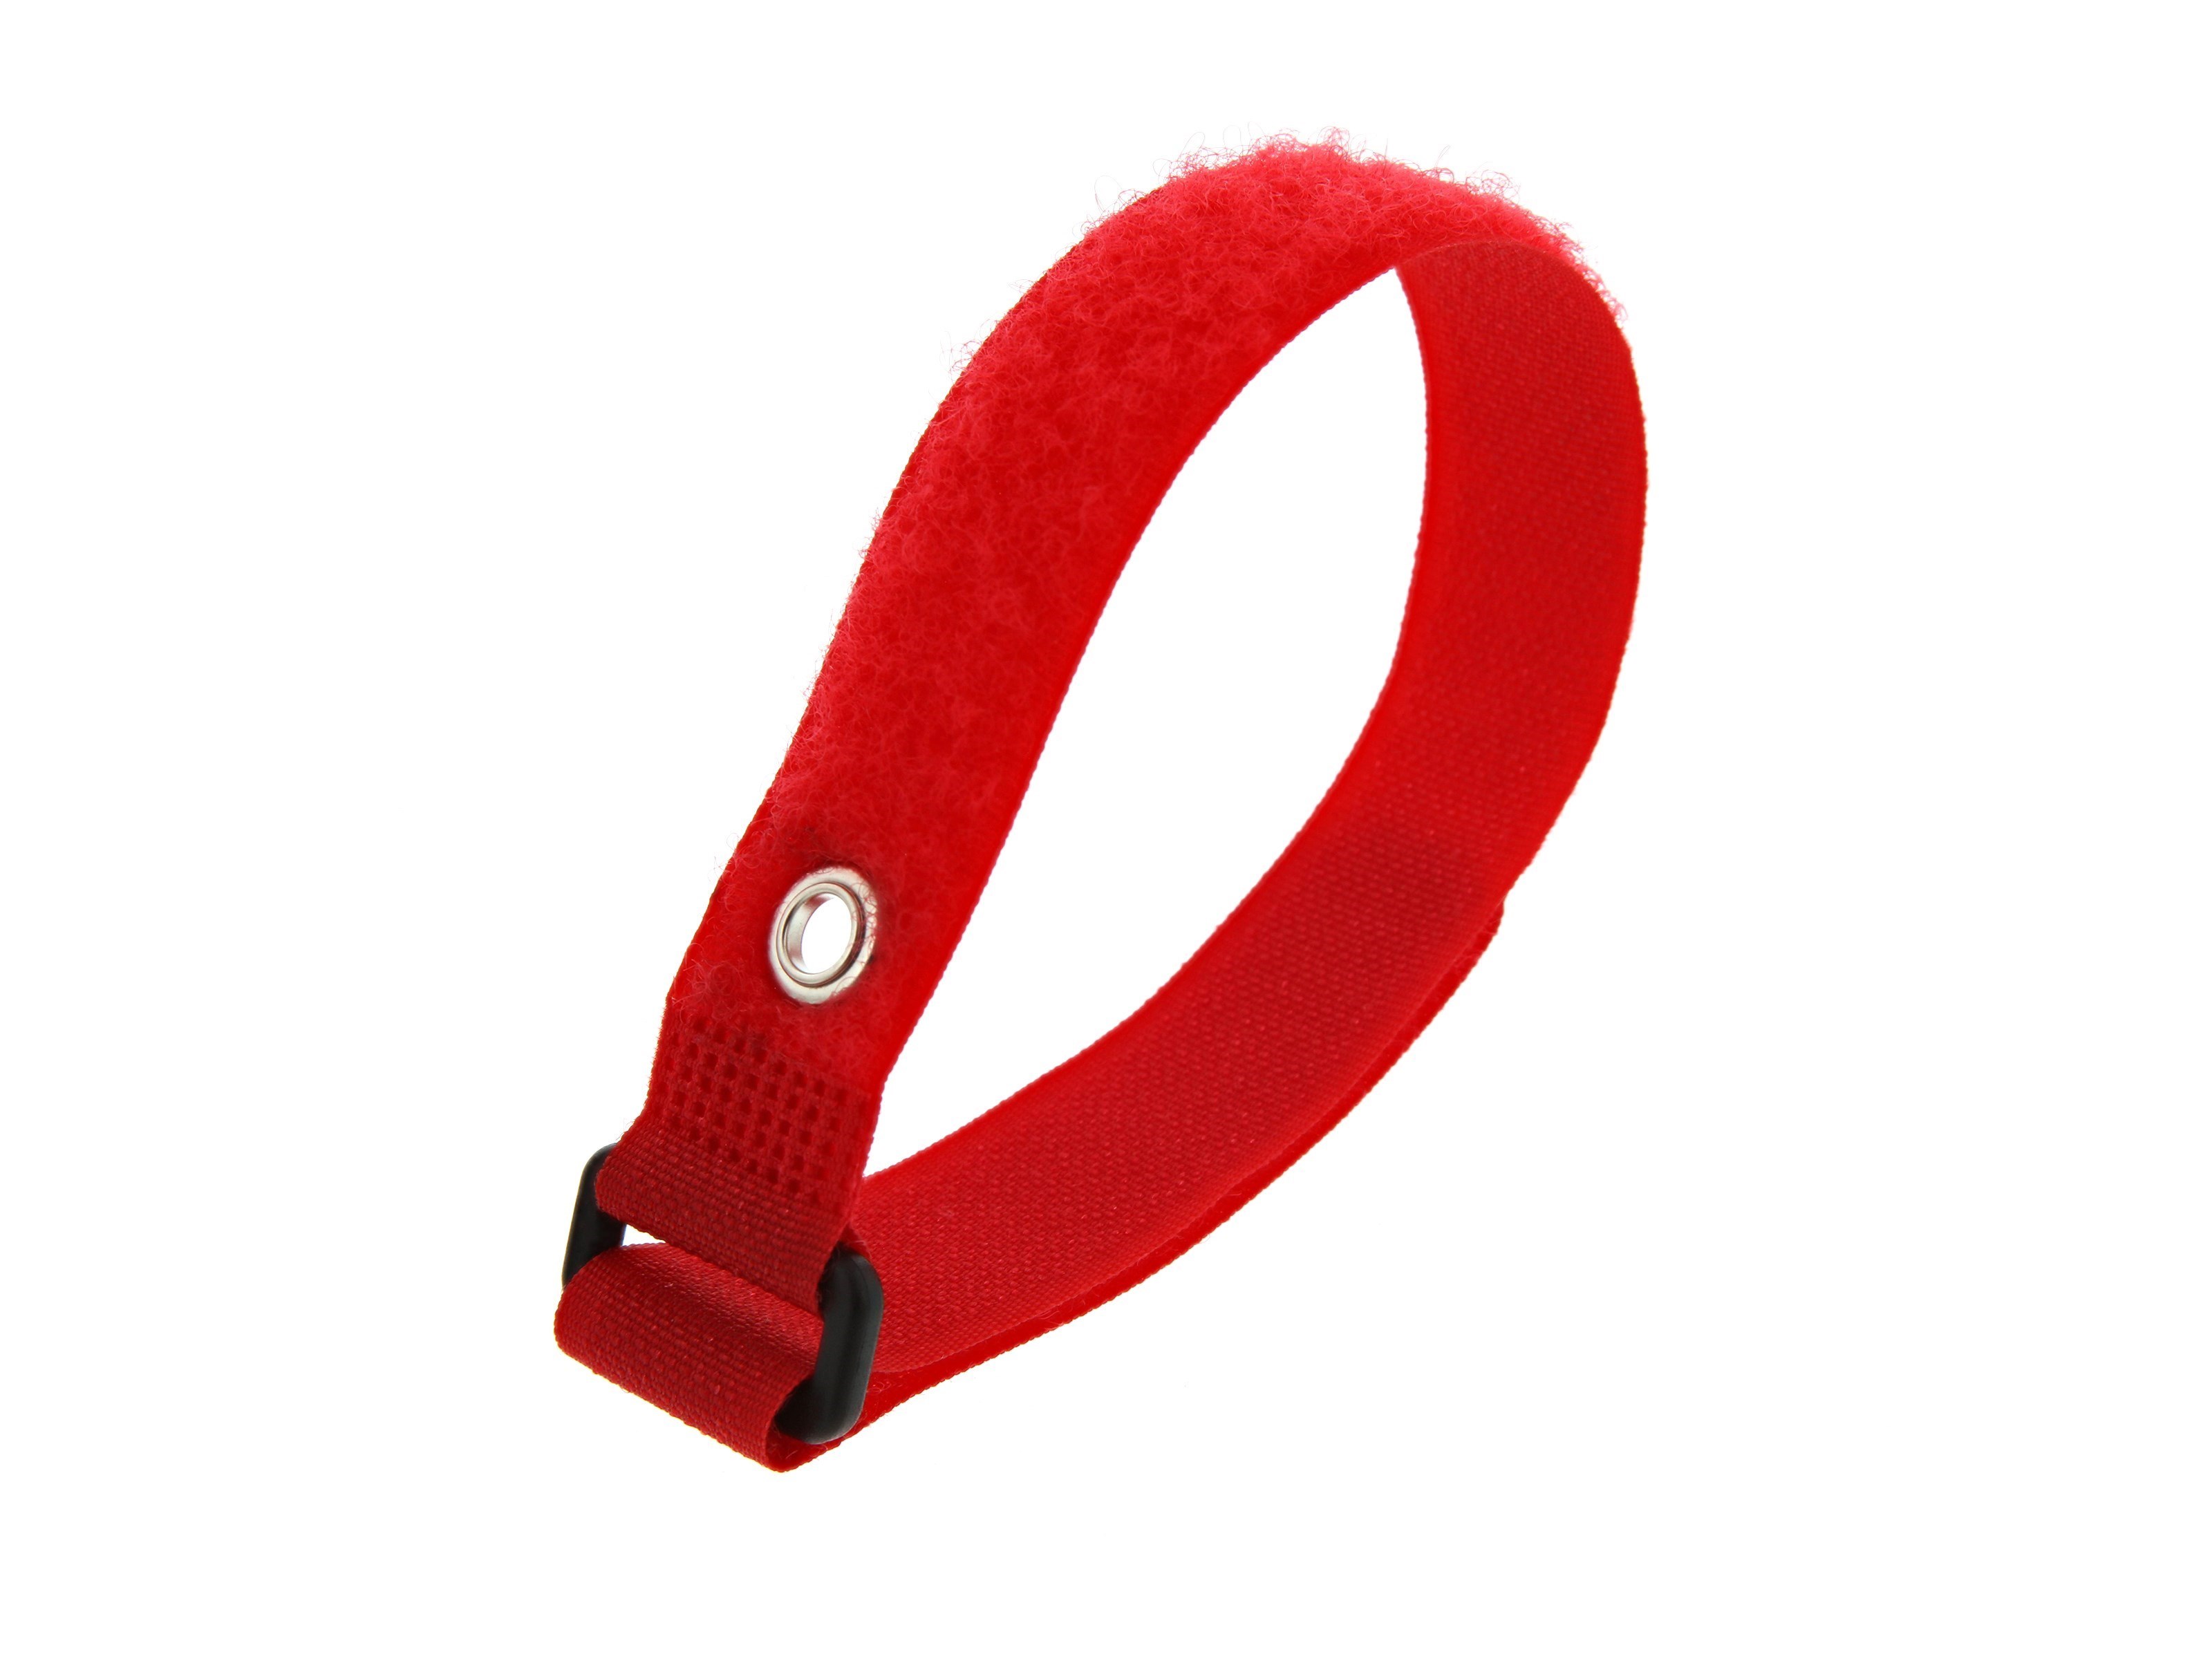 12 Inch Red Cinch Strap with Eyelet - 5 Pack - Secure™ Cable Ties